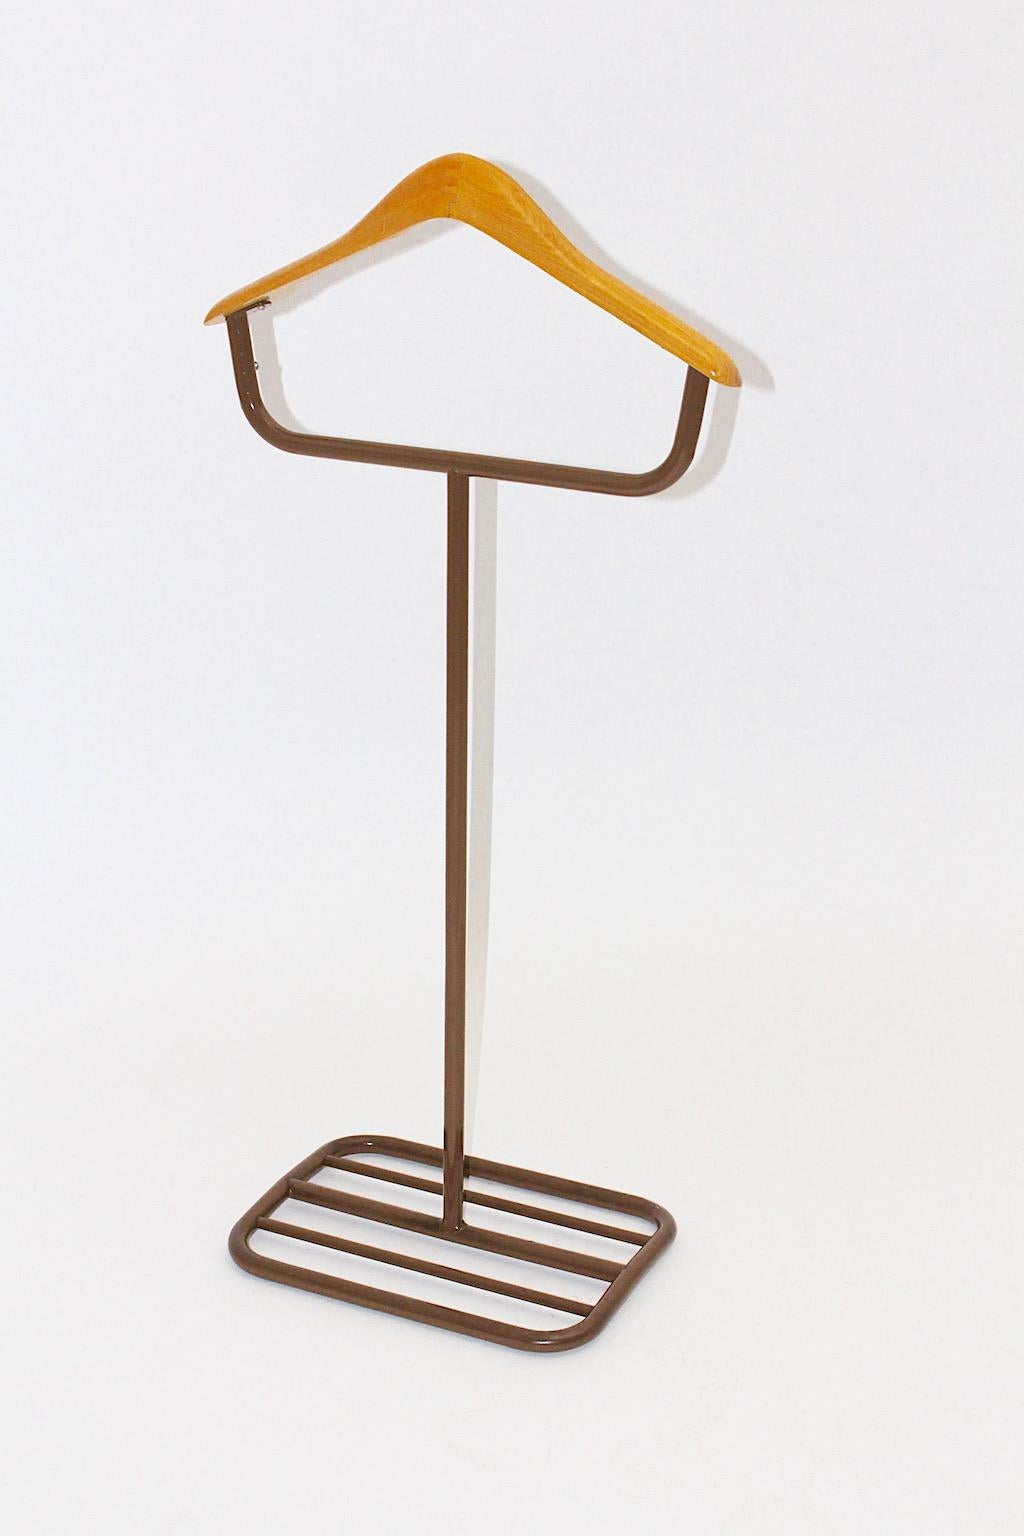 20th Century Brown Metal Beech Bauhaus Vintage Valet Coat Rack and Stands 1930s Germany For Sale